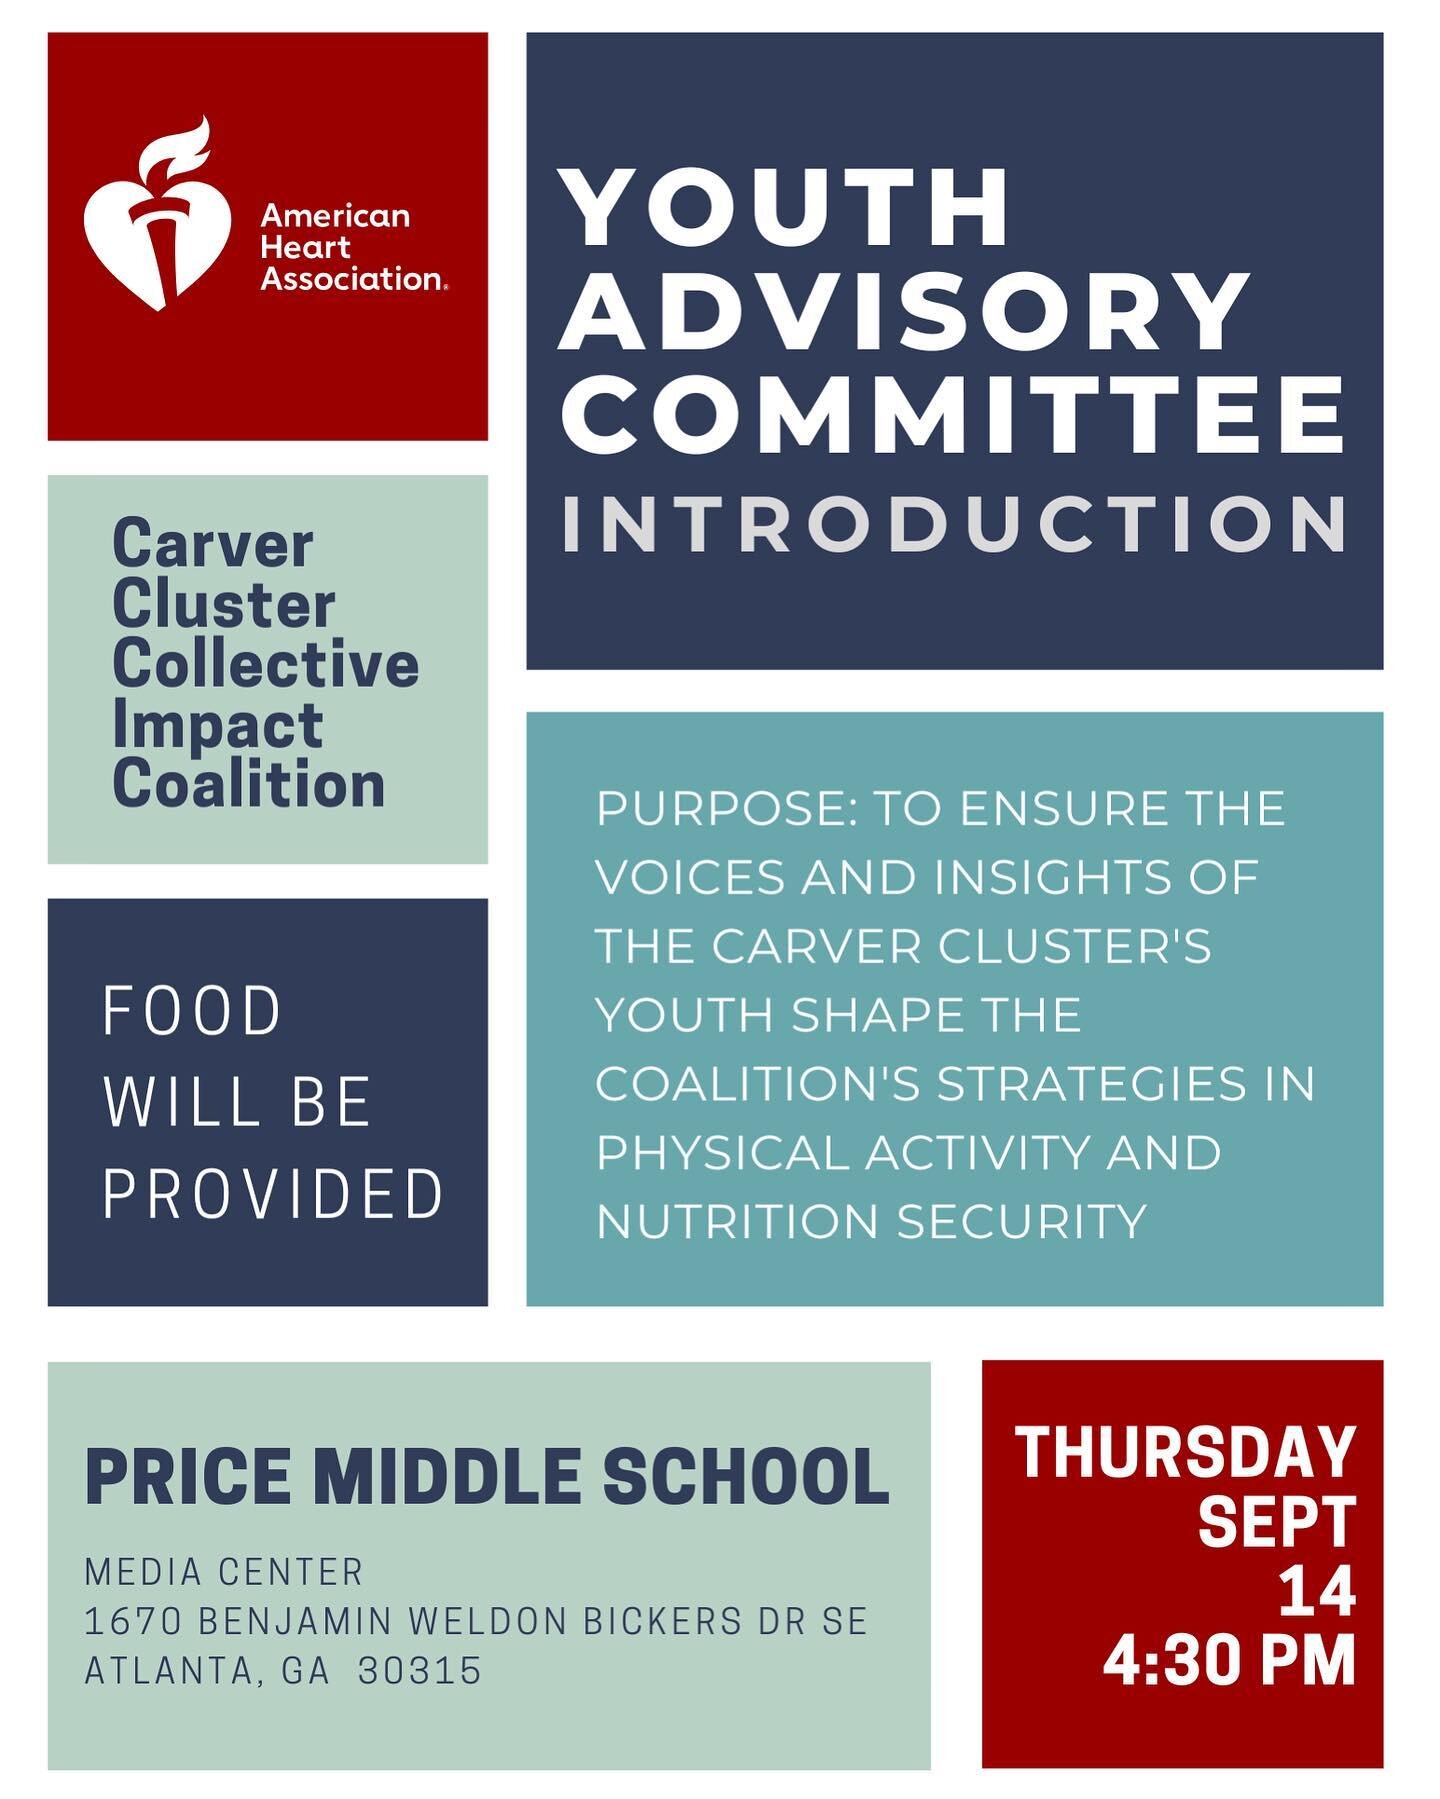 Want to make a DIFFERENCE? Want to use your voice to advocate for CHANGE? Want FREE FOOD? 🍲 Want a chance at raffle prizes? 🎟️ 
Come to the Carver Cluster Youth Advisory interest meeting to help change the community for the better! 
🔊🔊🗣️🗣️

Mid